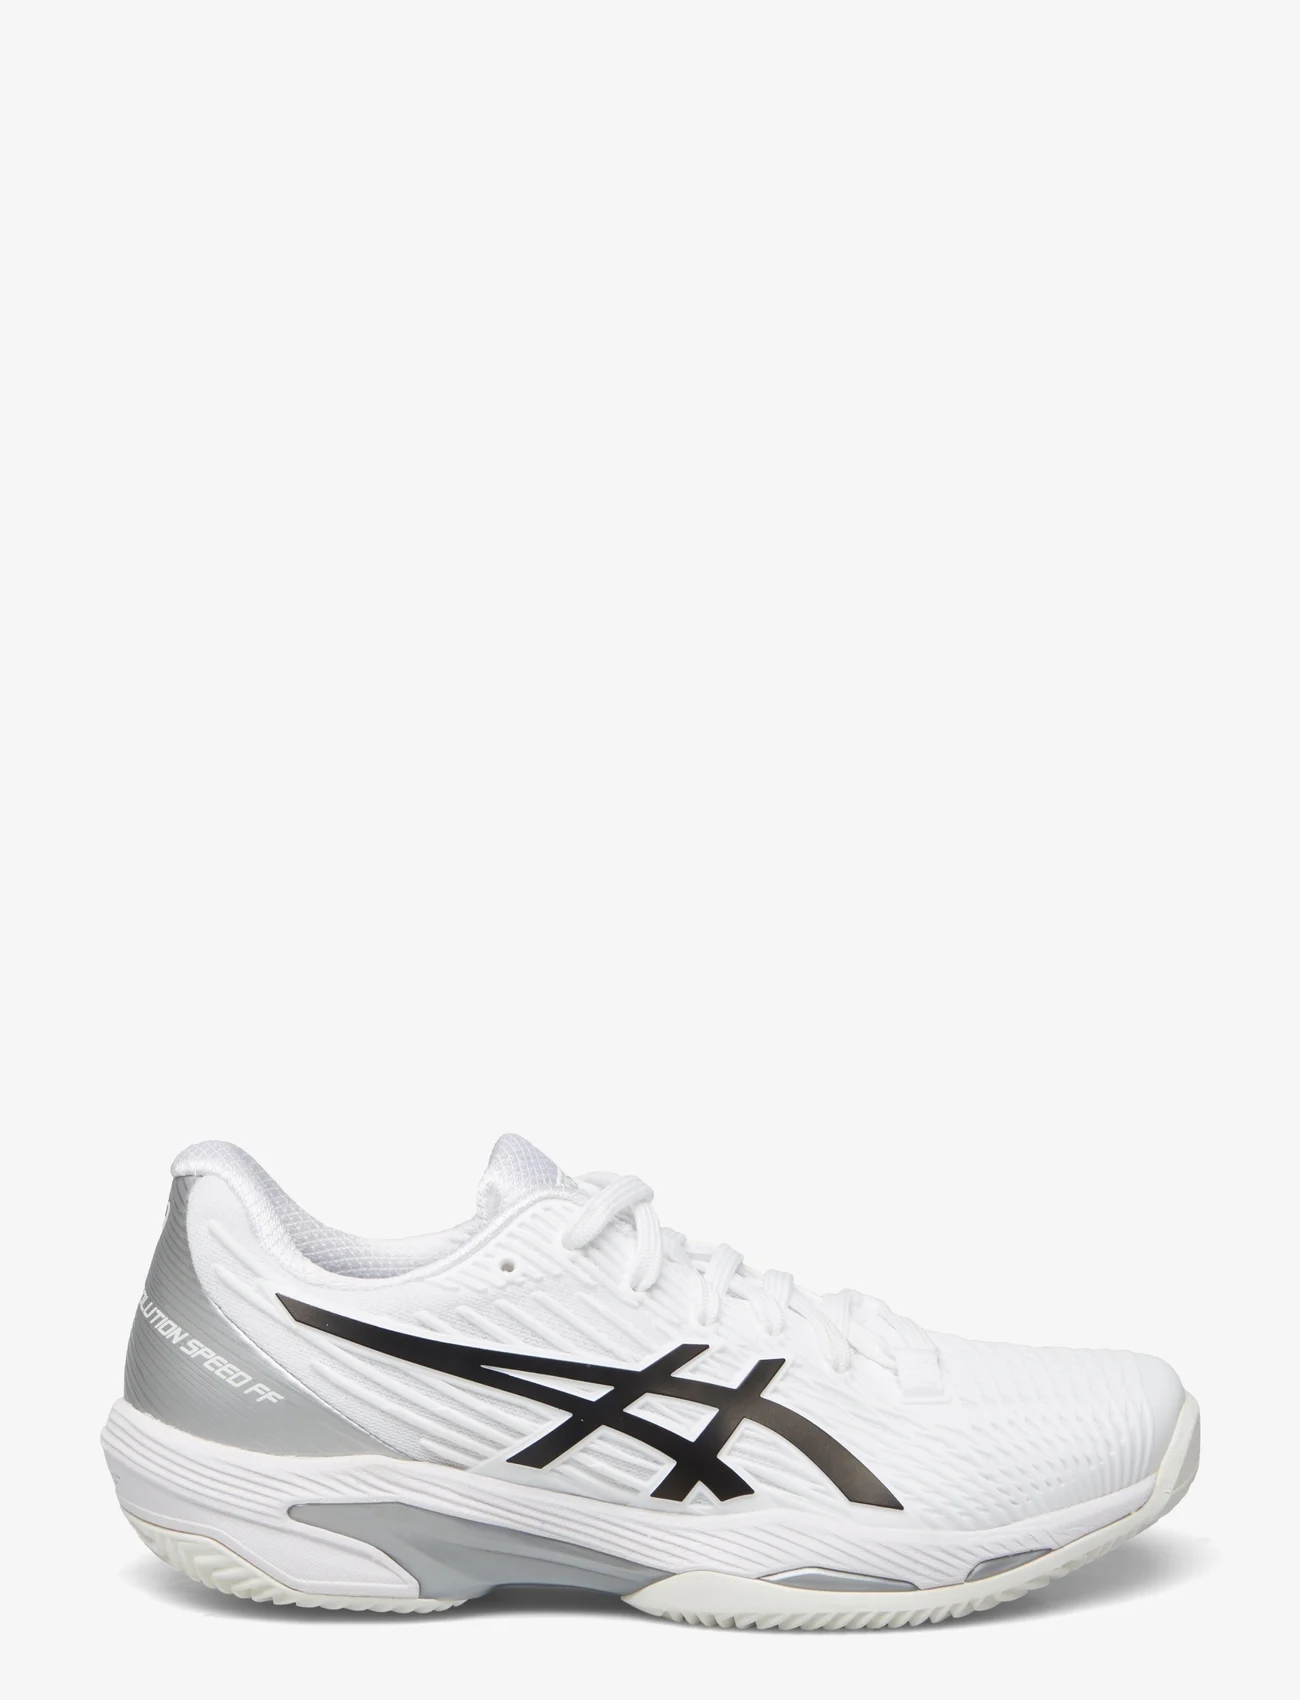 Asics - SOLUTION SPEED FF 2 CLAY - white/black - 1